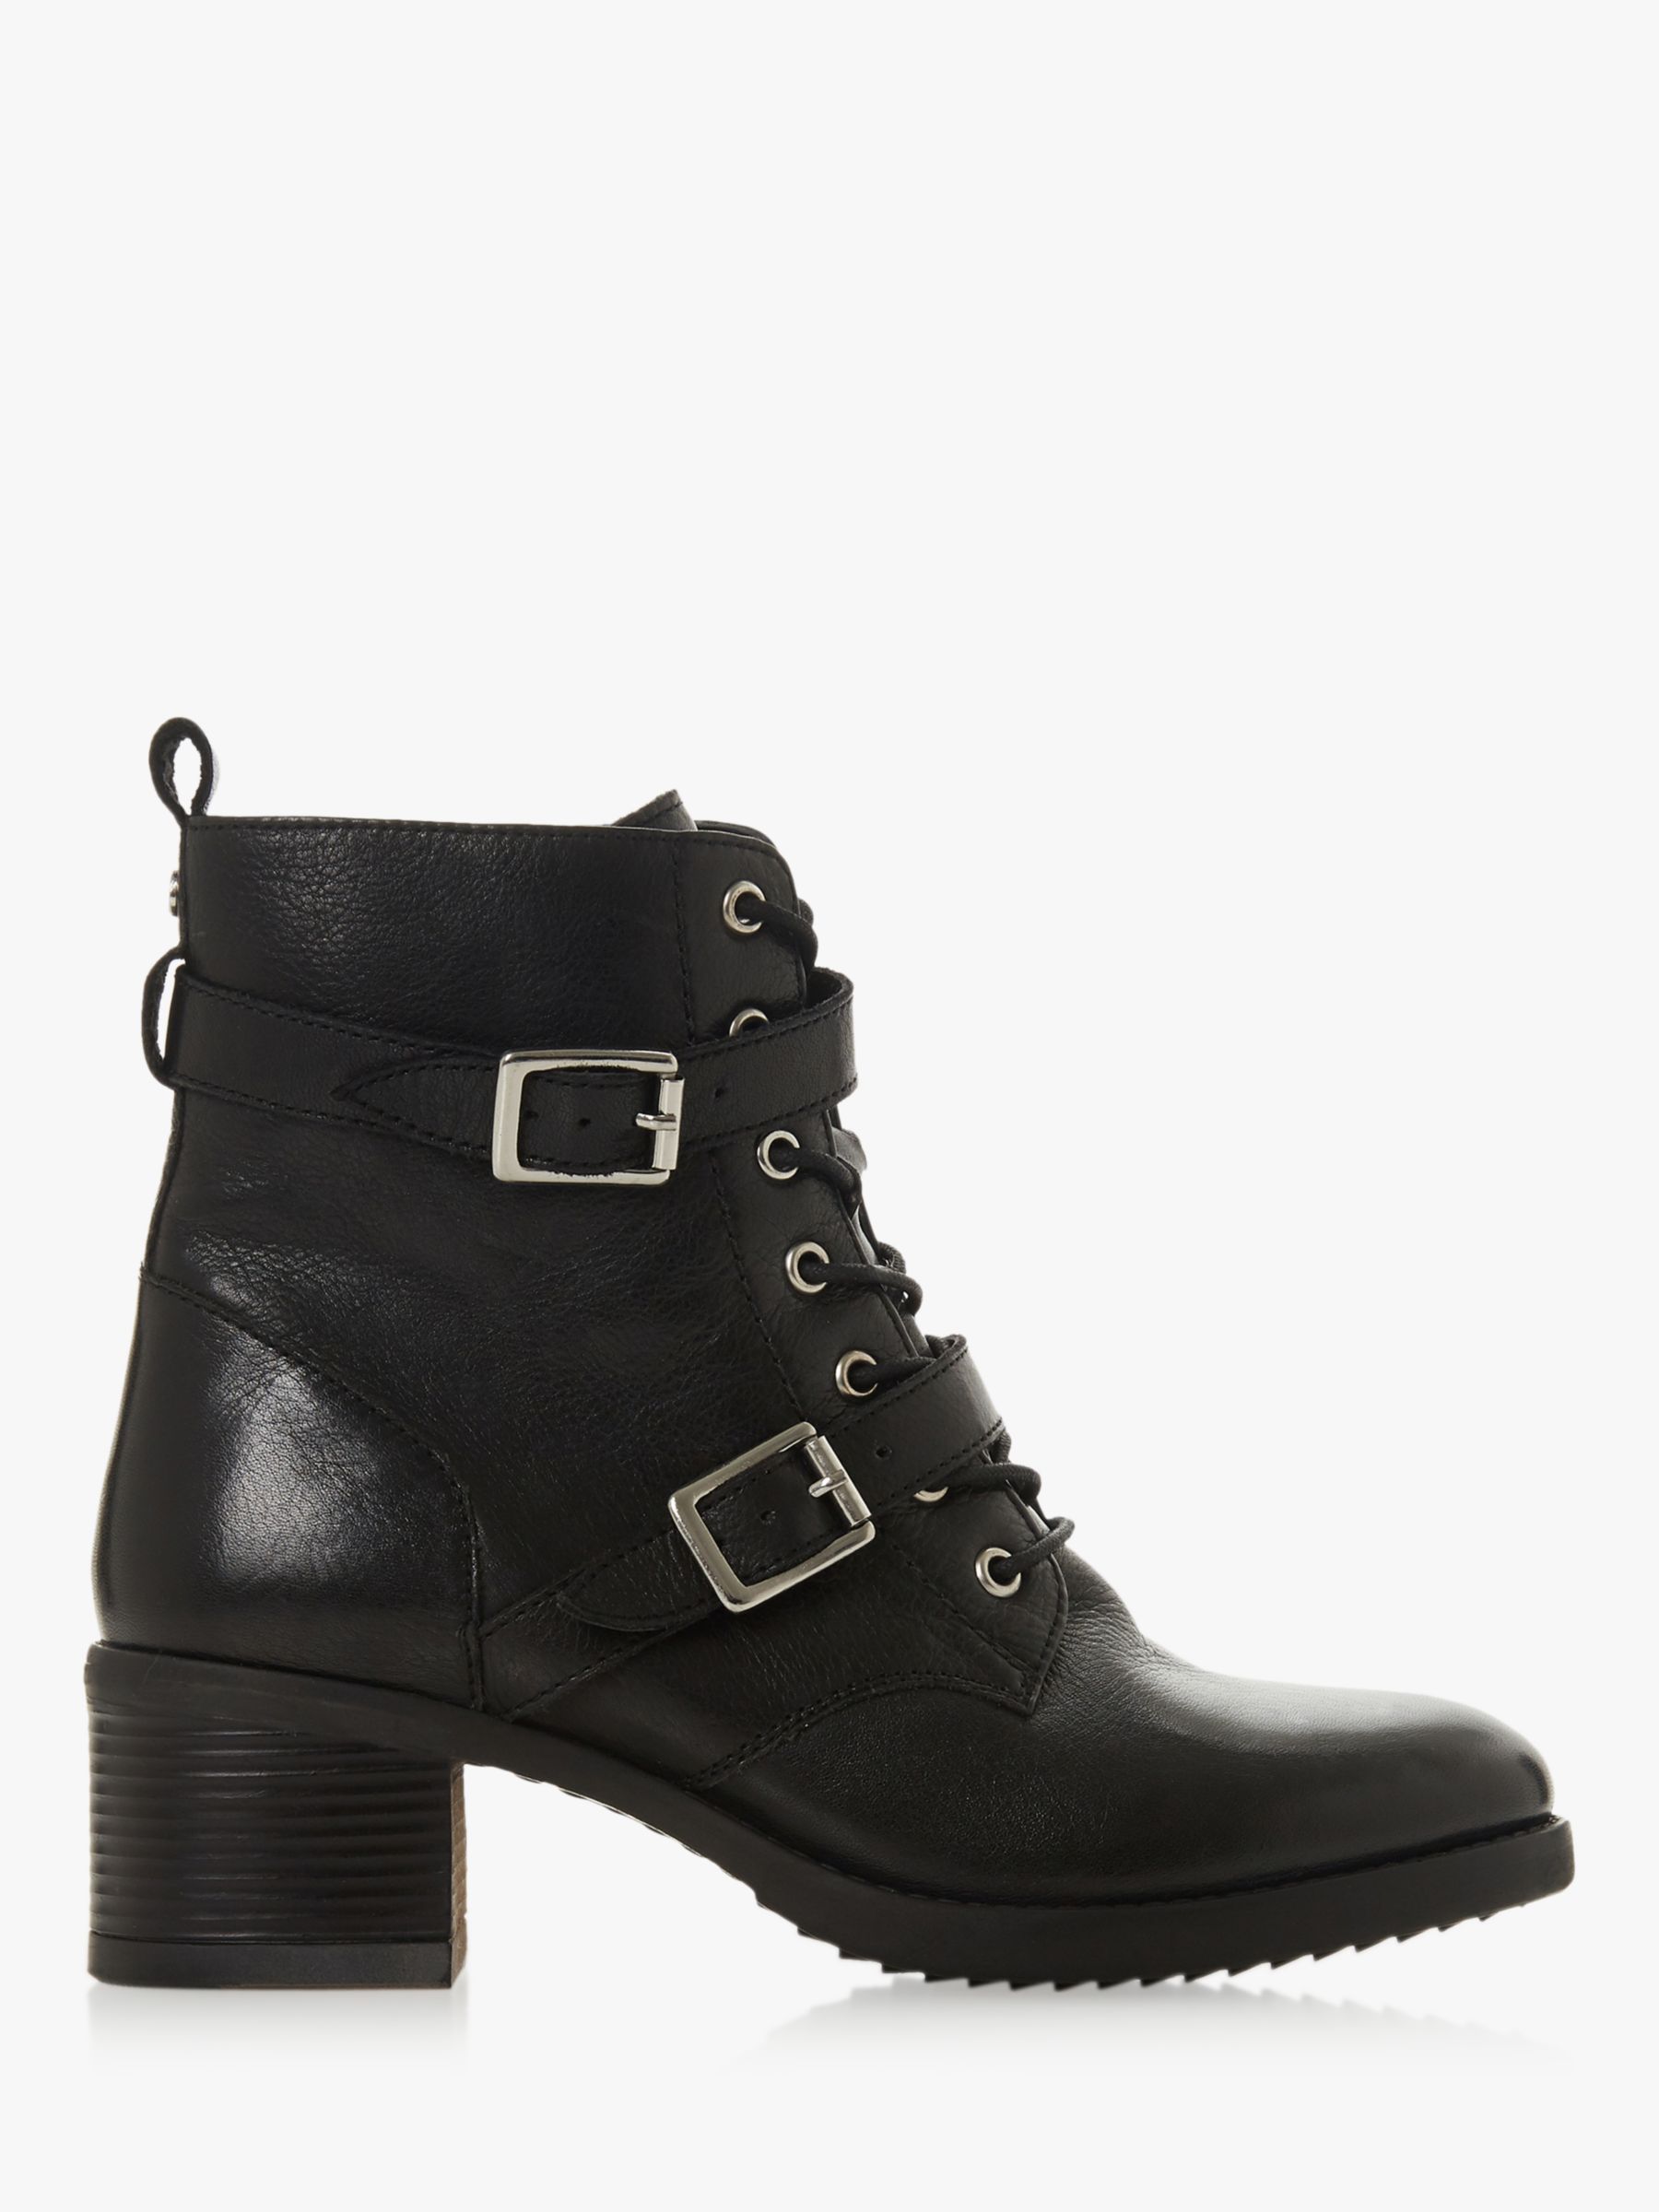 Dune Paxtone Buckle Lace Ankle Boots, Black Leather